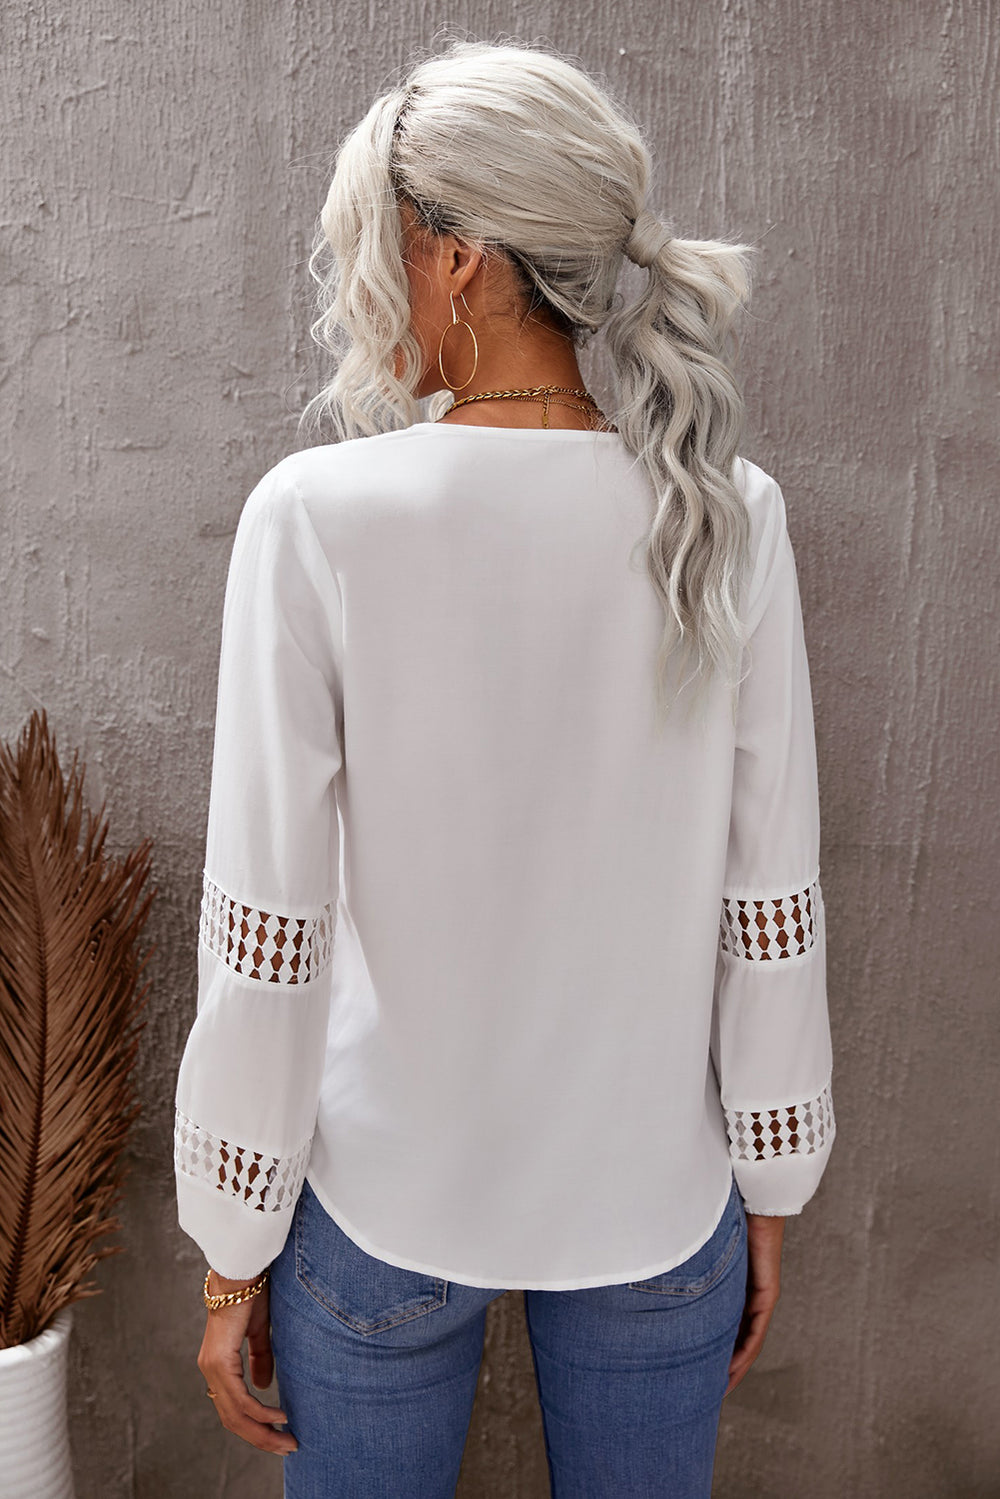 White Long Sleeve V Neck Crochet Hollow-out Blouse, Shop for cheap White Long Sleeve V Neck Crochet Hollow-out Blouse online? Buy at Modeshe.com on sale!